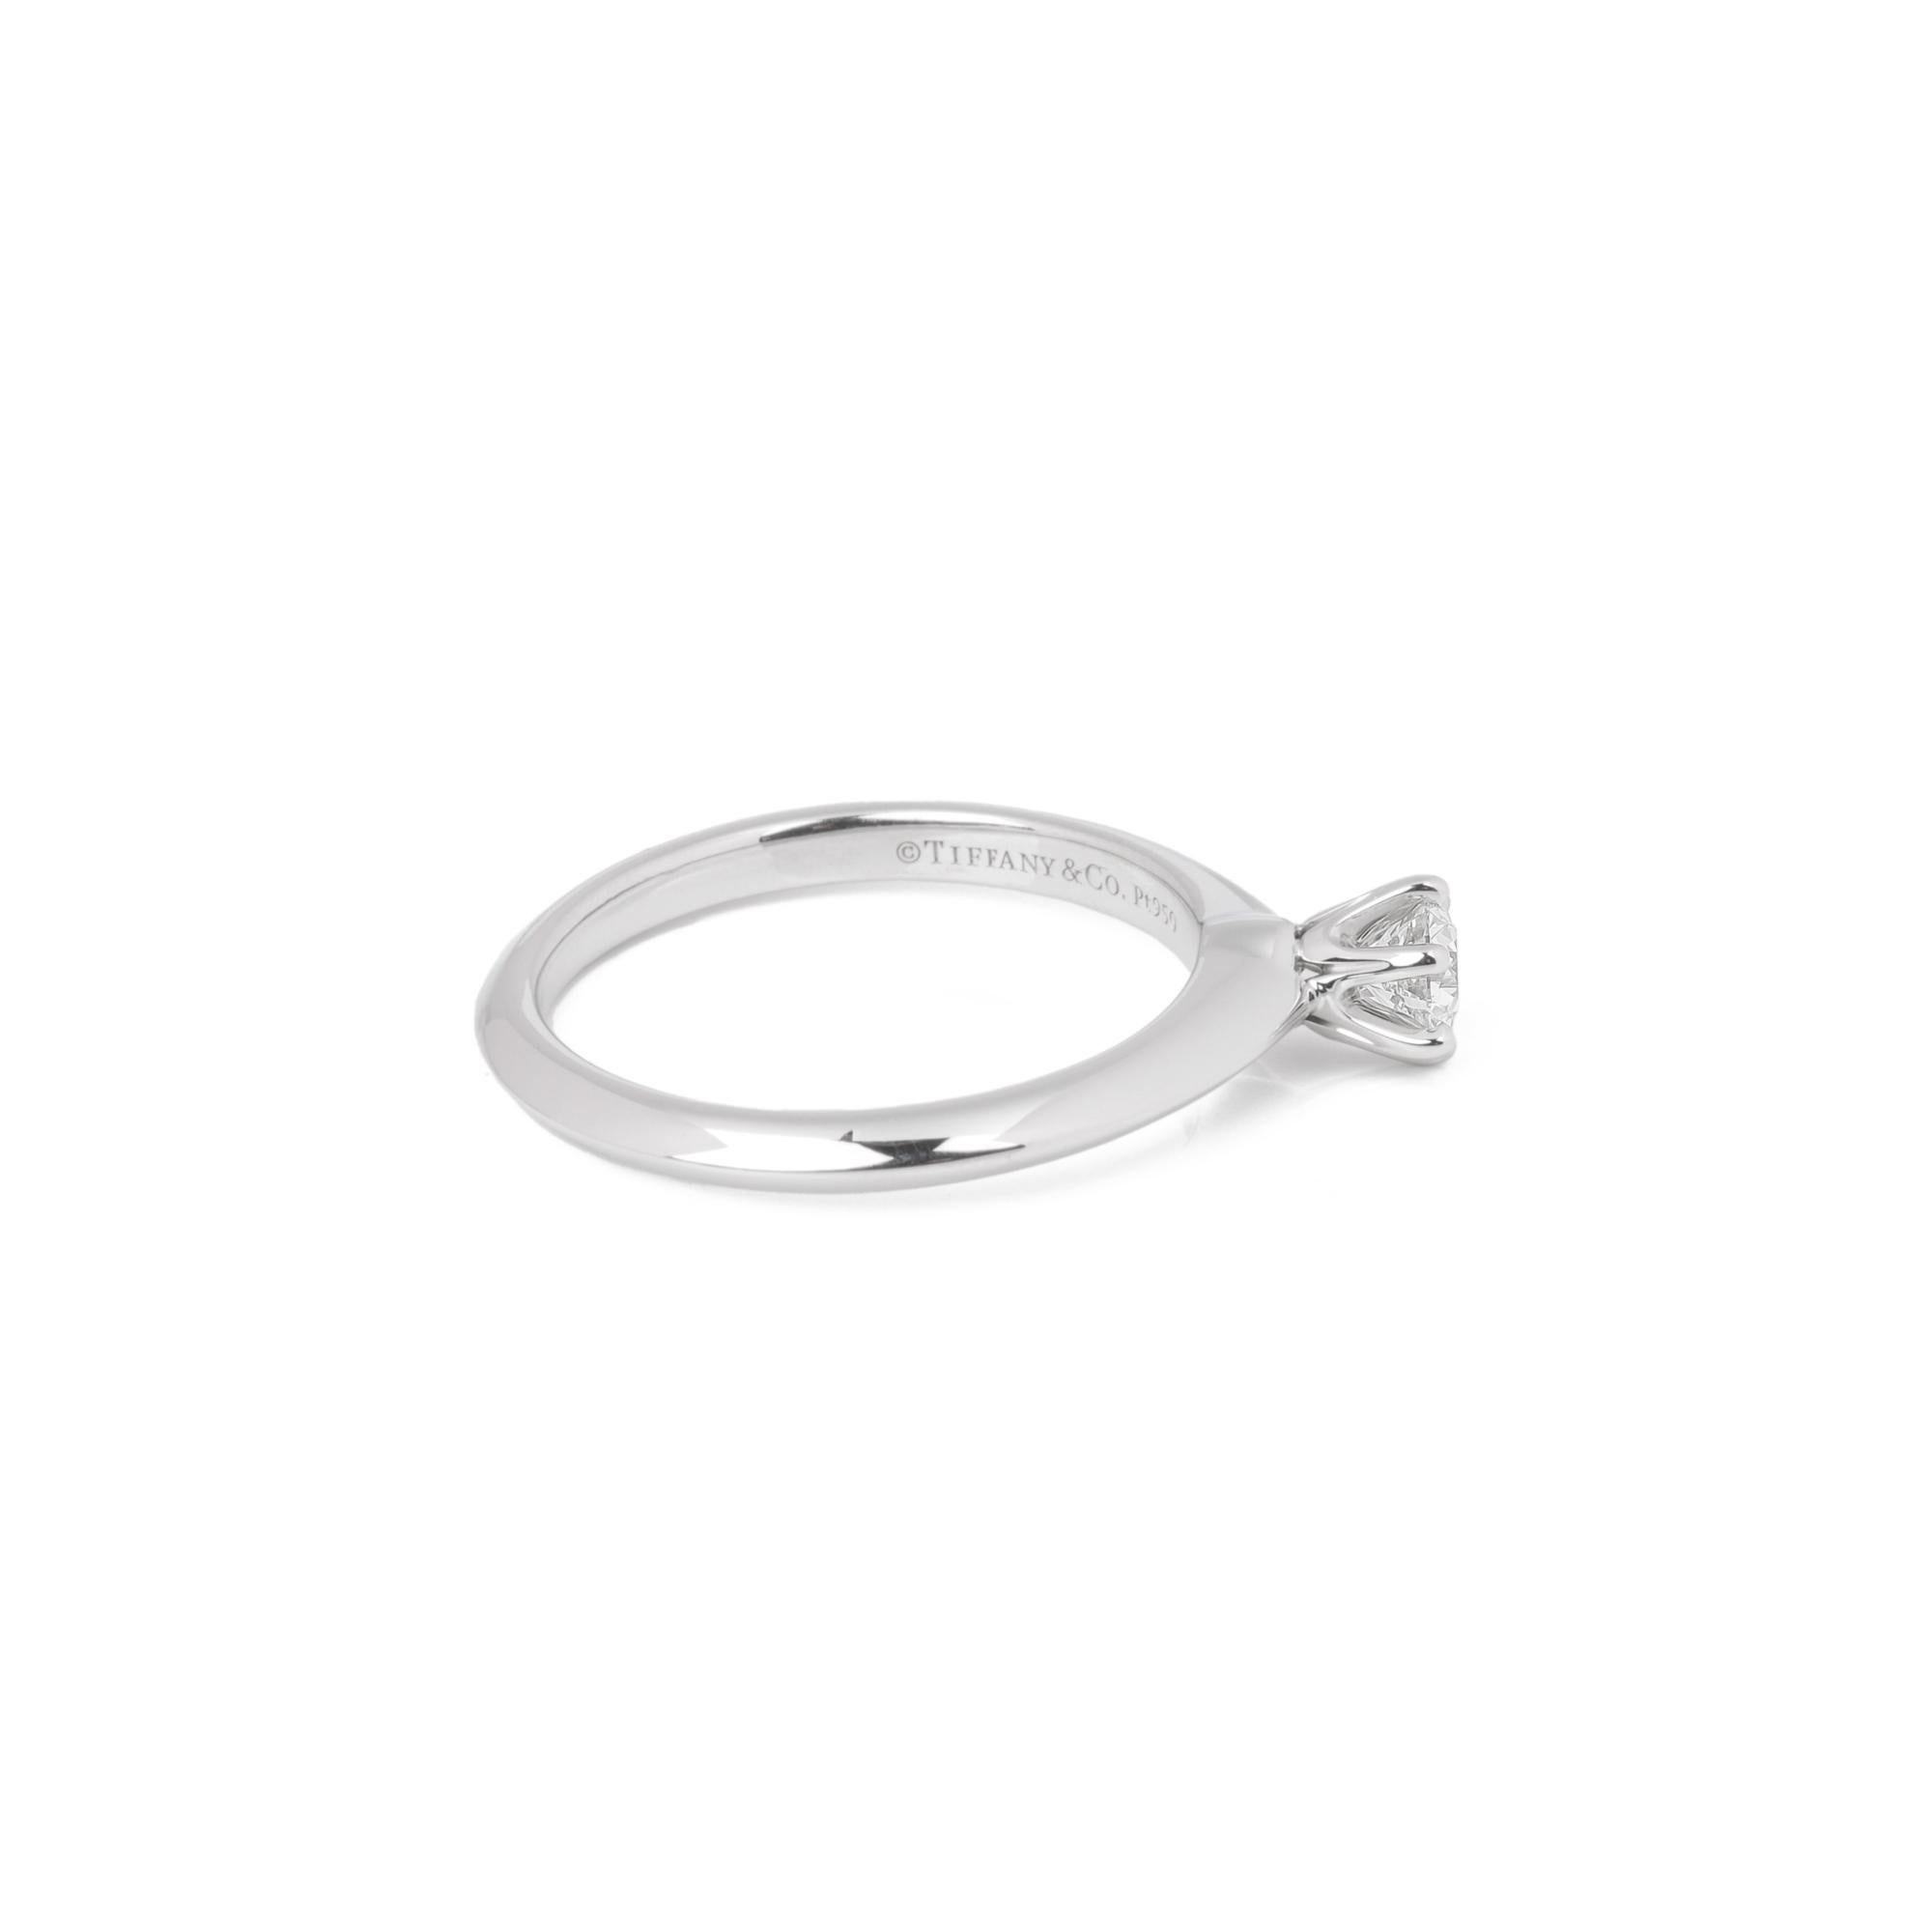 ITEM CONDITION	Excellent
MANUFACTURER	Tiffany & Co.
MODEL	Tiffany Setting
GENDER	Women's
ACCOMPANIED BY	Box and certificate
UK RING SIZE	J
EU RING SIZE	49
US RING SIZE	5
BAND WIDTH	2mm
TOTAL WEIGHT	3.8g
PRIMARY STONE QUANTITY	1
PRIMARY STONE CARAT